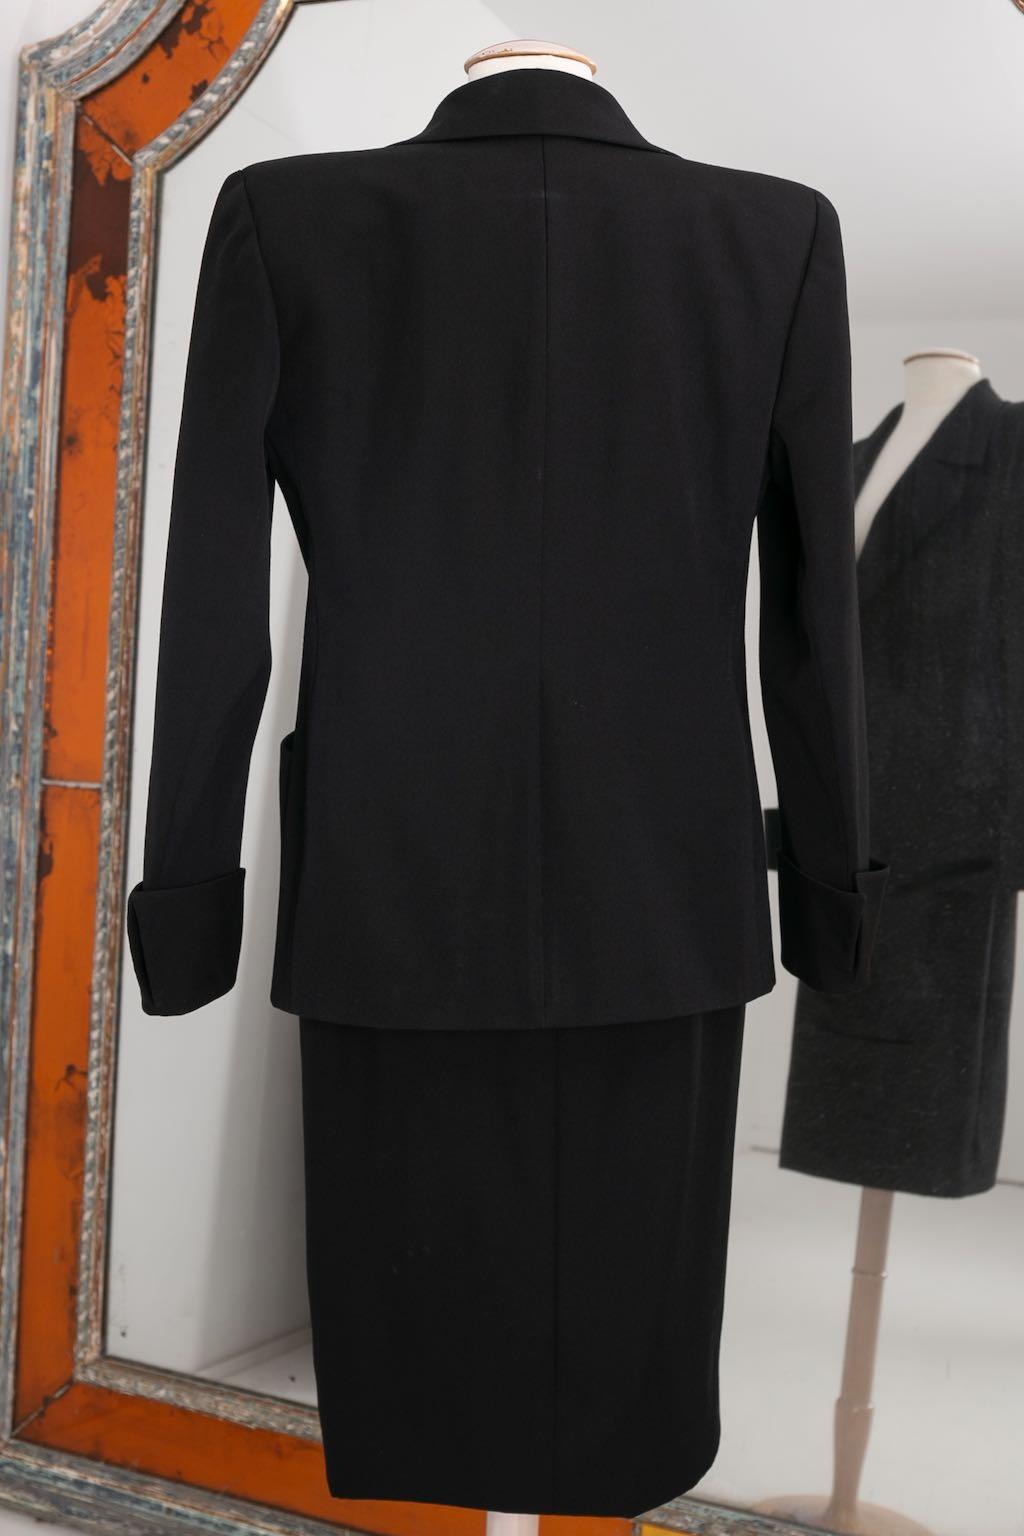 Yves Saint Laurent Haute Couture Black Skirt and Jacket Set, circa 1981/1982 For Sale 14